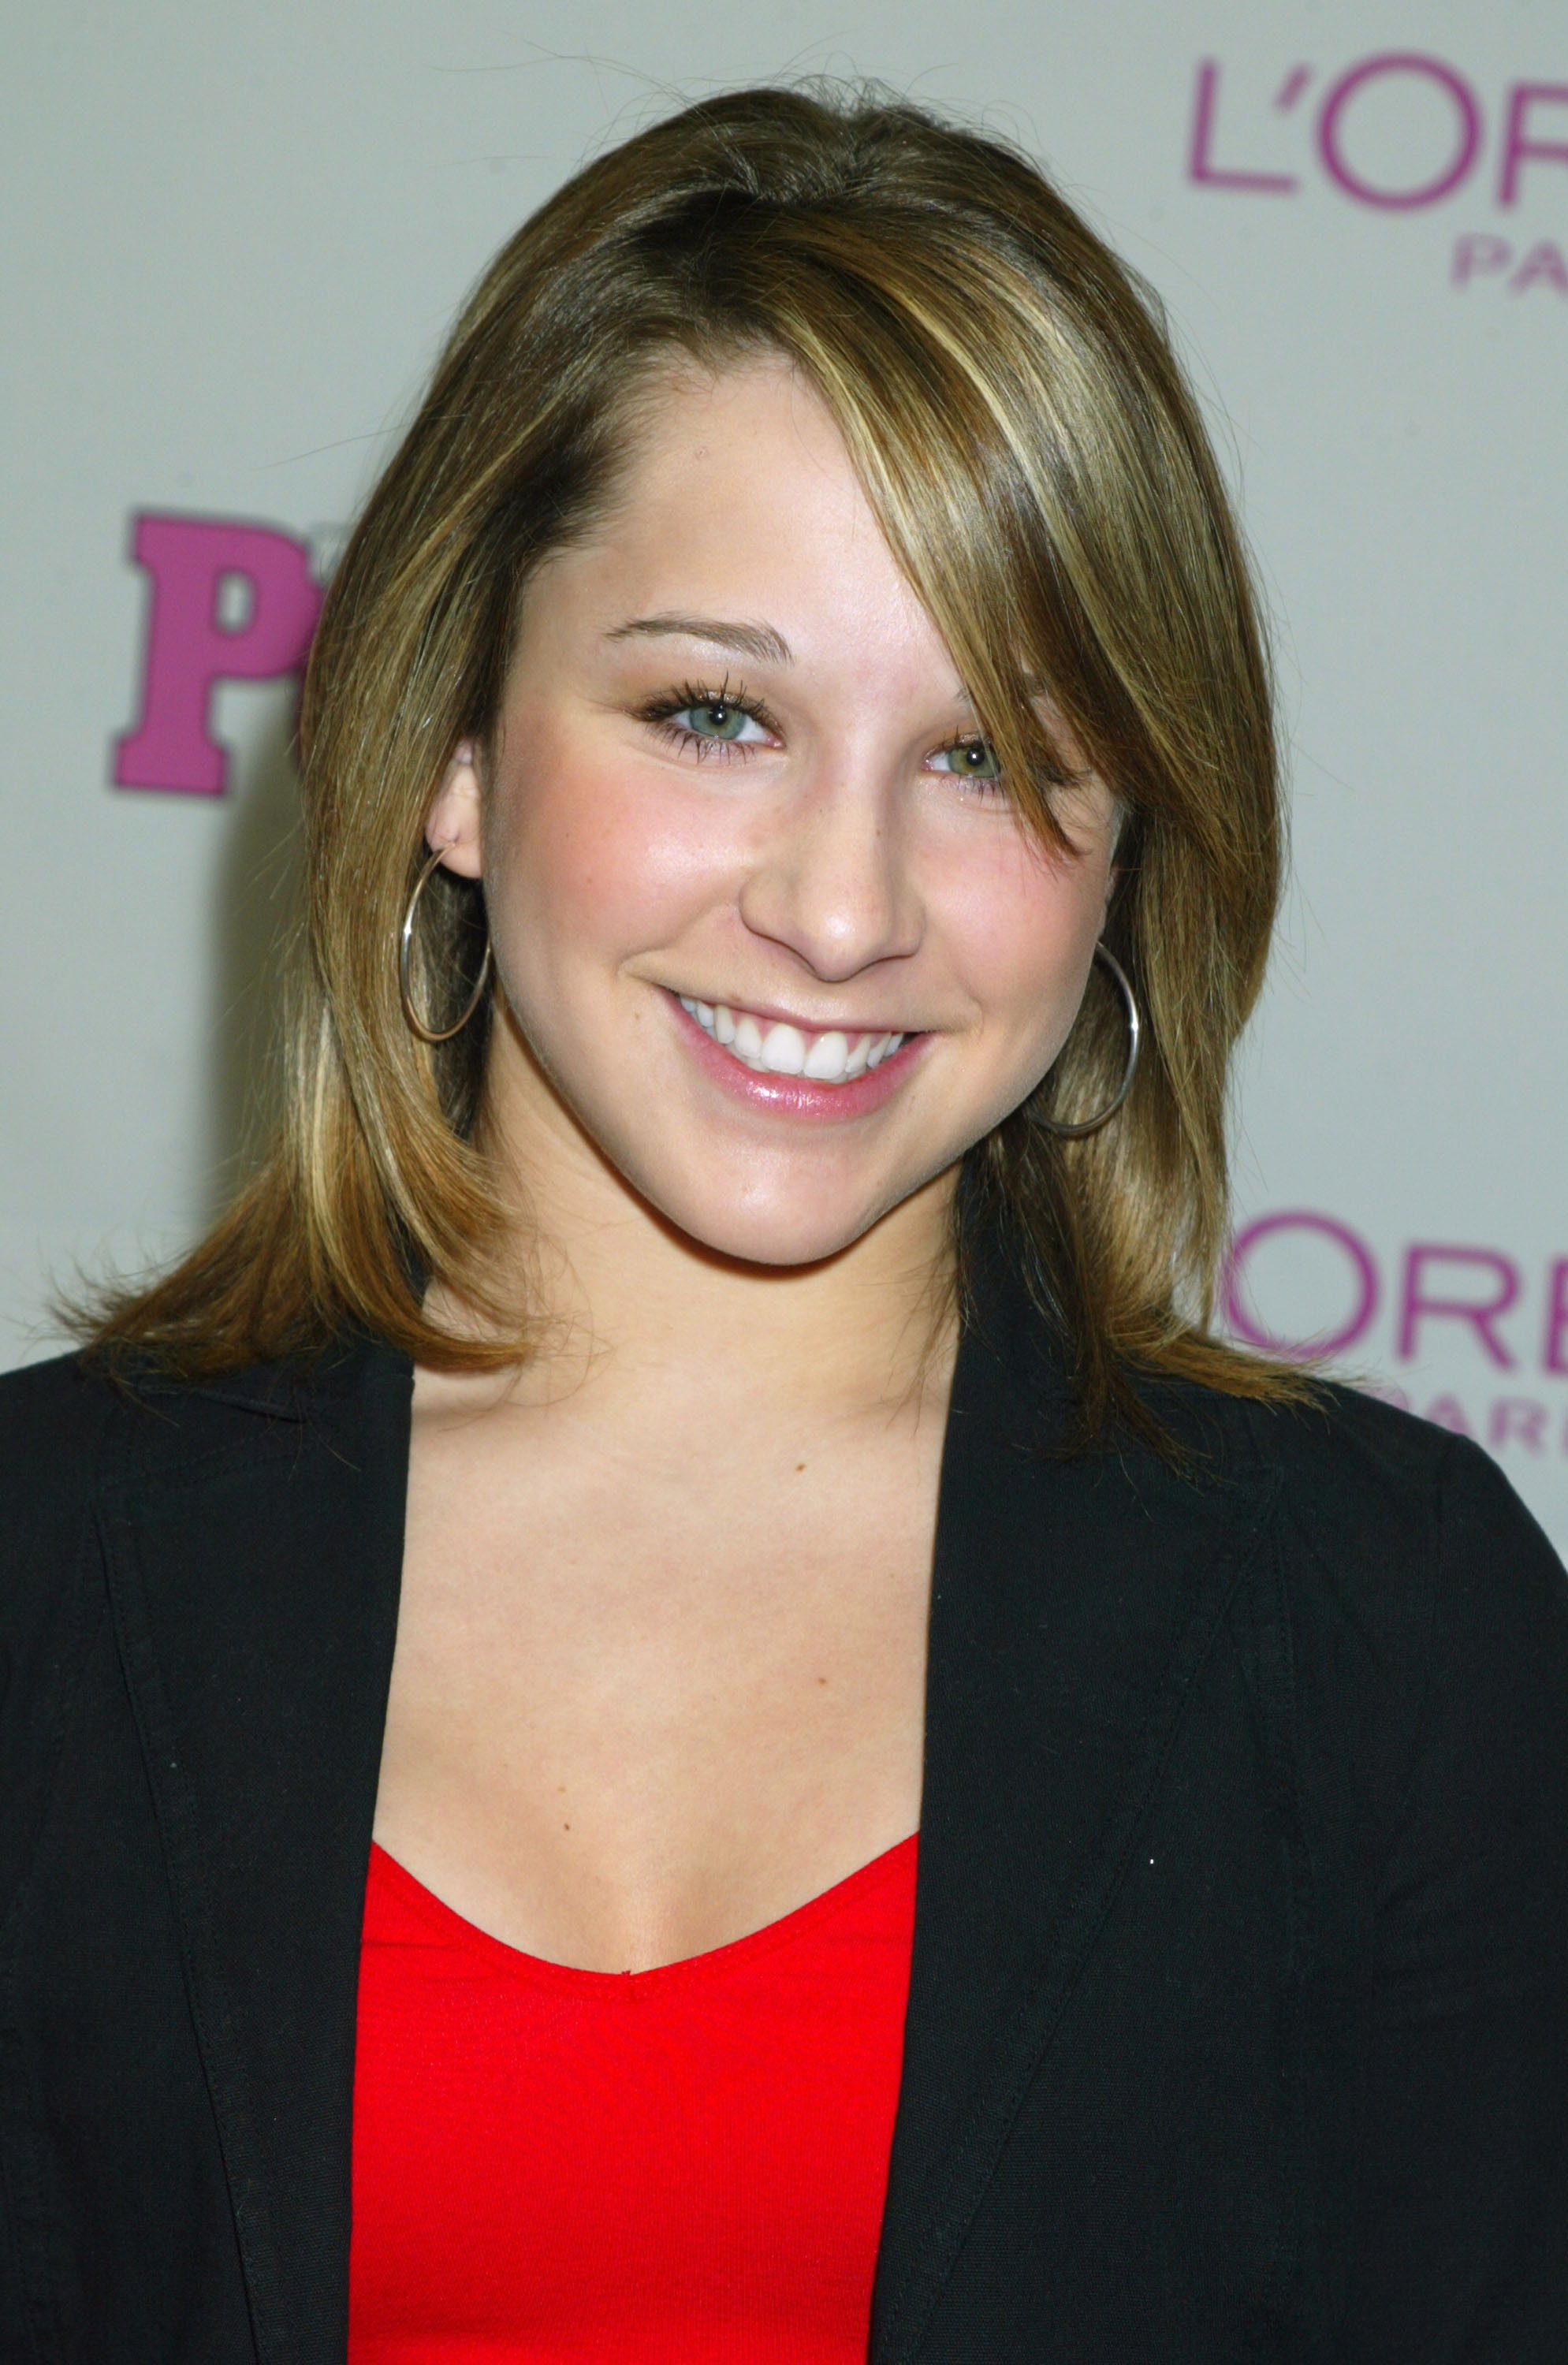 Carly Patterson at Teen People and L'Oreal Honor 20 Teens Who Will Change The World - Press Room on March 01, 2005, in New York City | Photo: Gregory Pace/FilmMagic/Getty Images